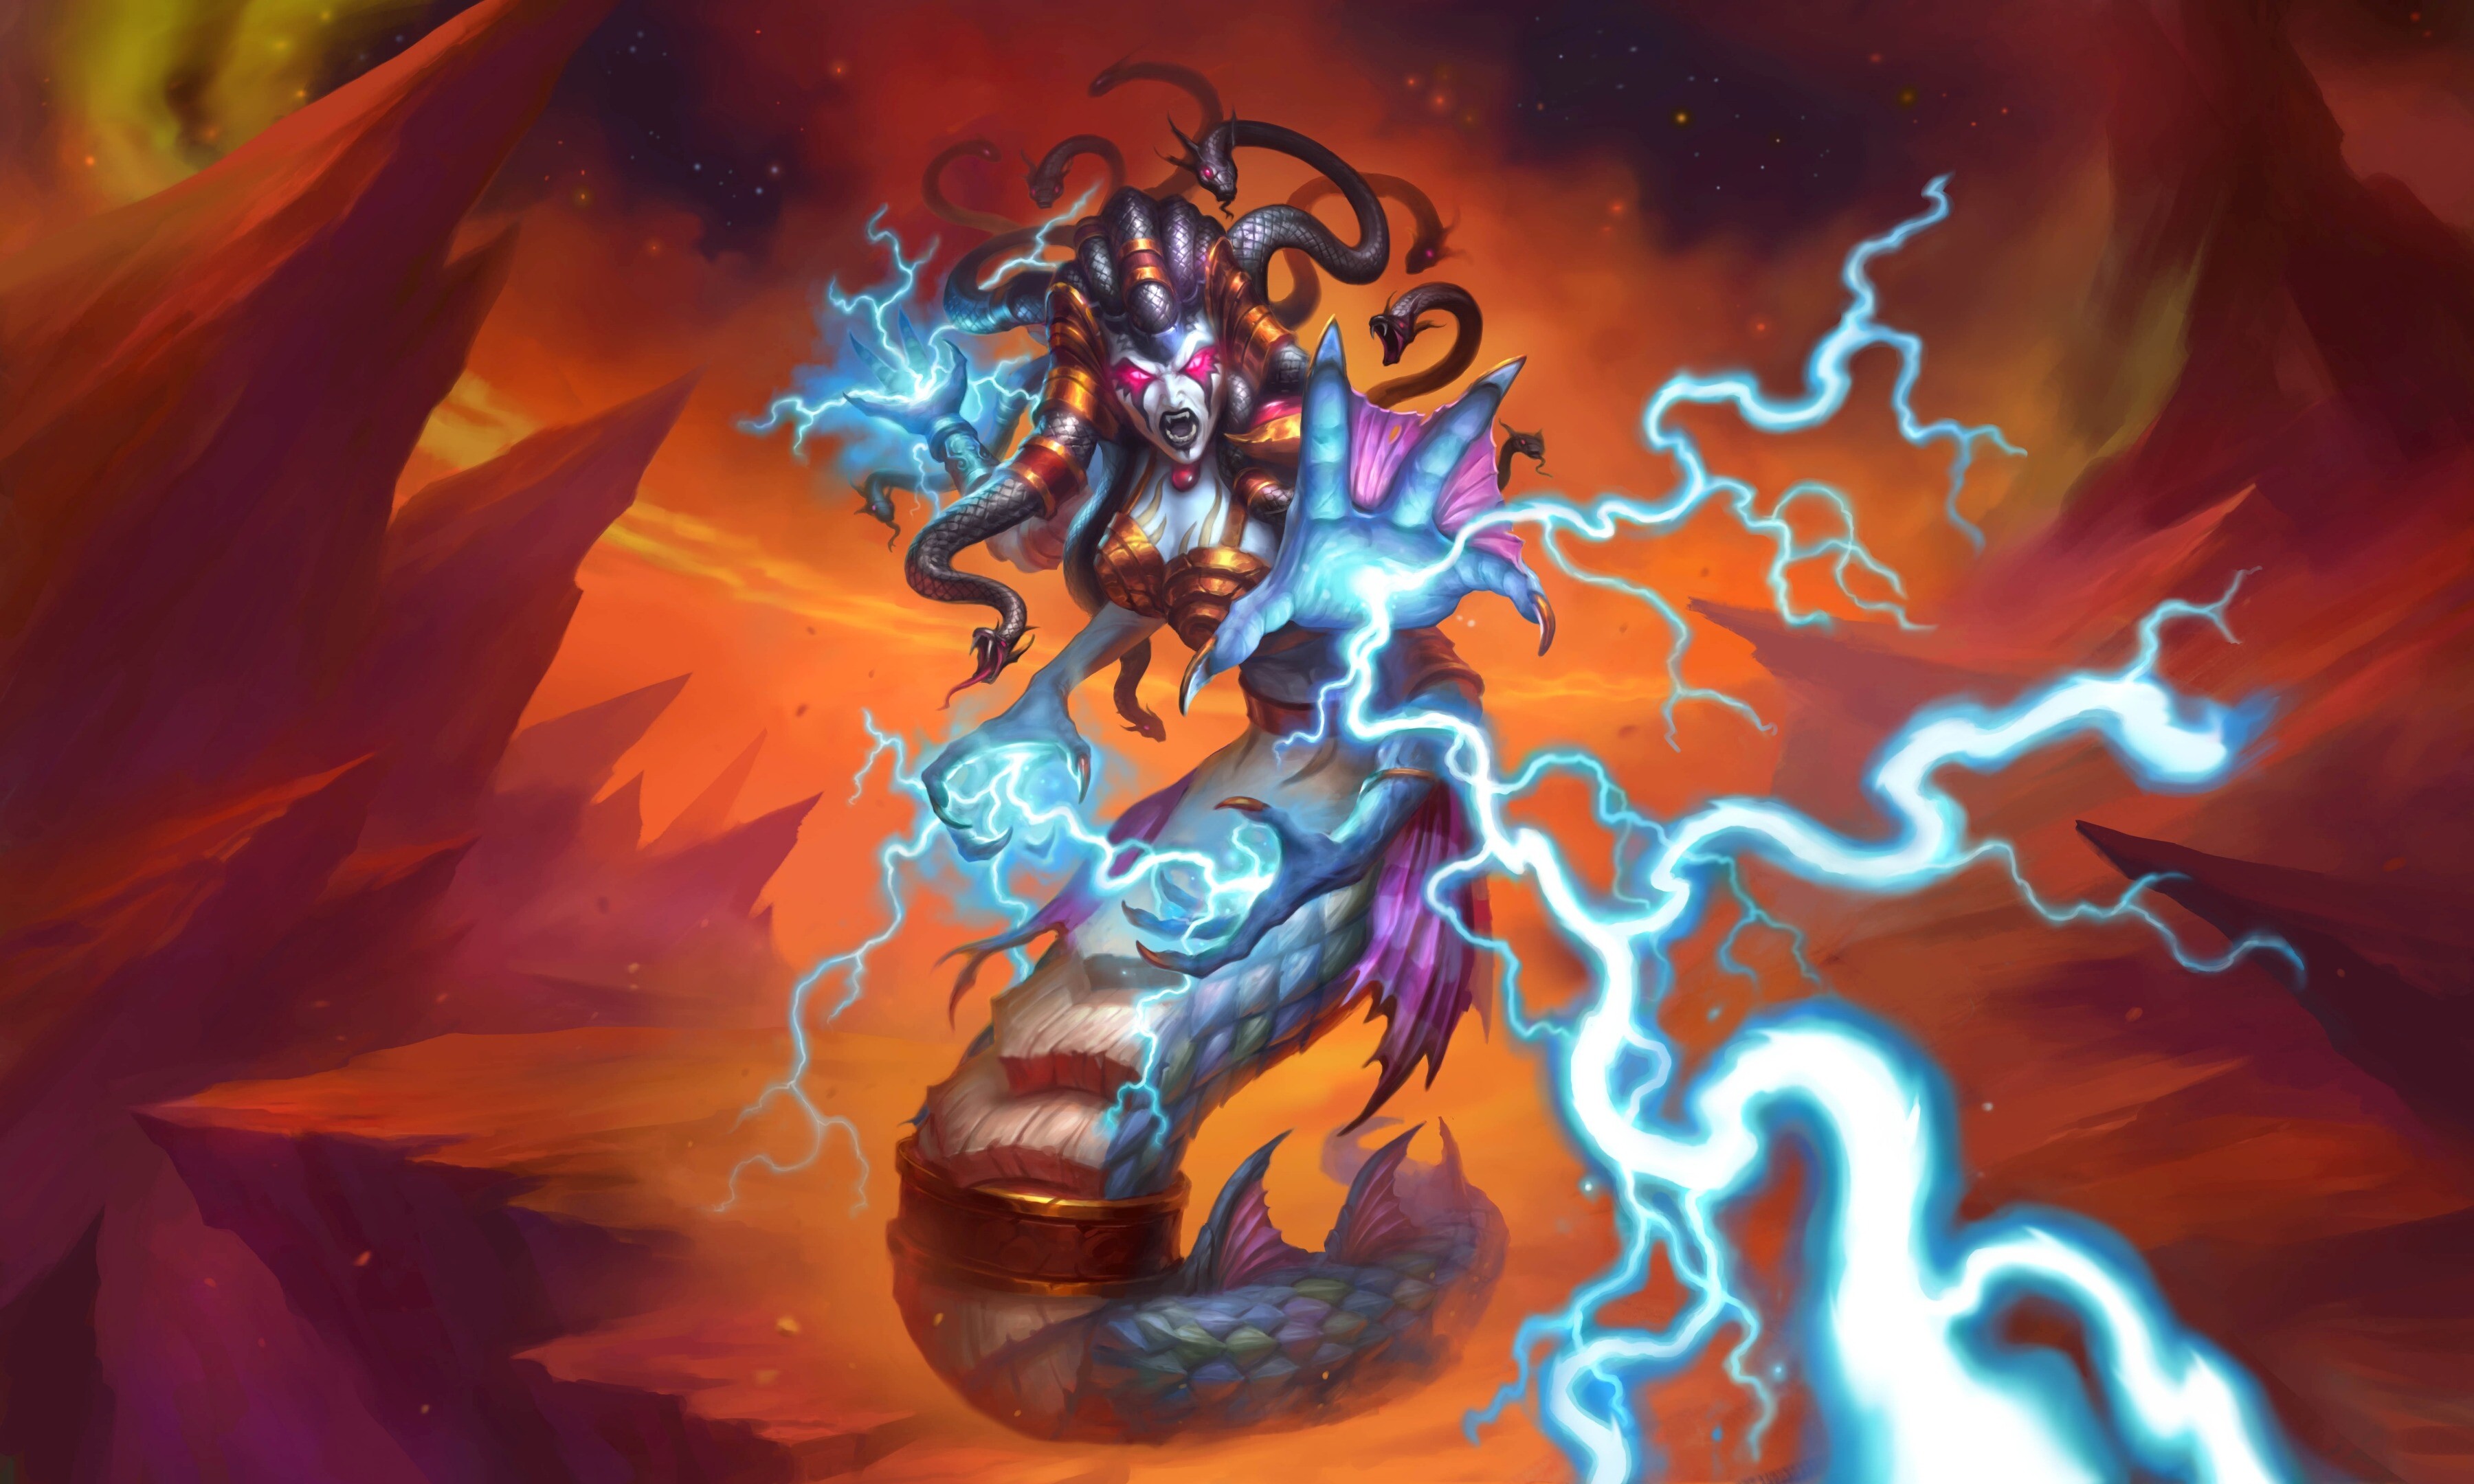 Hearthstone: New content for the game involves the addition of new card sets and gameplay, taking the form of either expansion packs or adventures that reward the player with collectible cards upon completion. 3600x2160 HD Wallpaper.